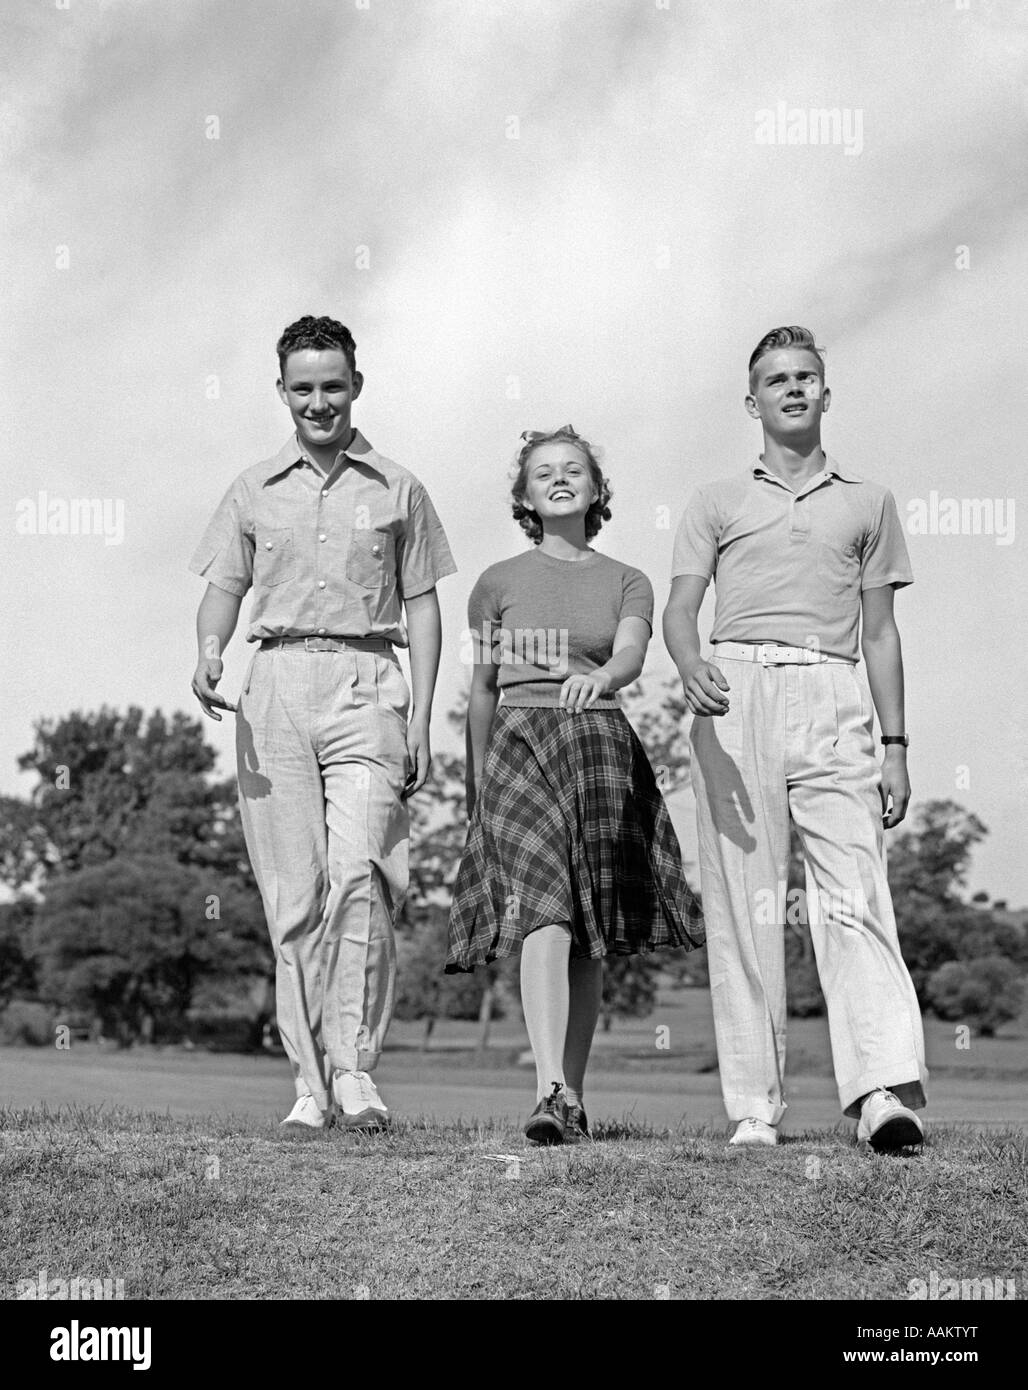 1930s 1940s TWO TEEN BOYS ONE GIRL WALKING CONFIDENTLY IN GRASSY MEADOW CASUAL  DRESS Stock Photo - Alamy